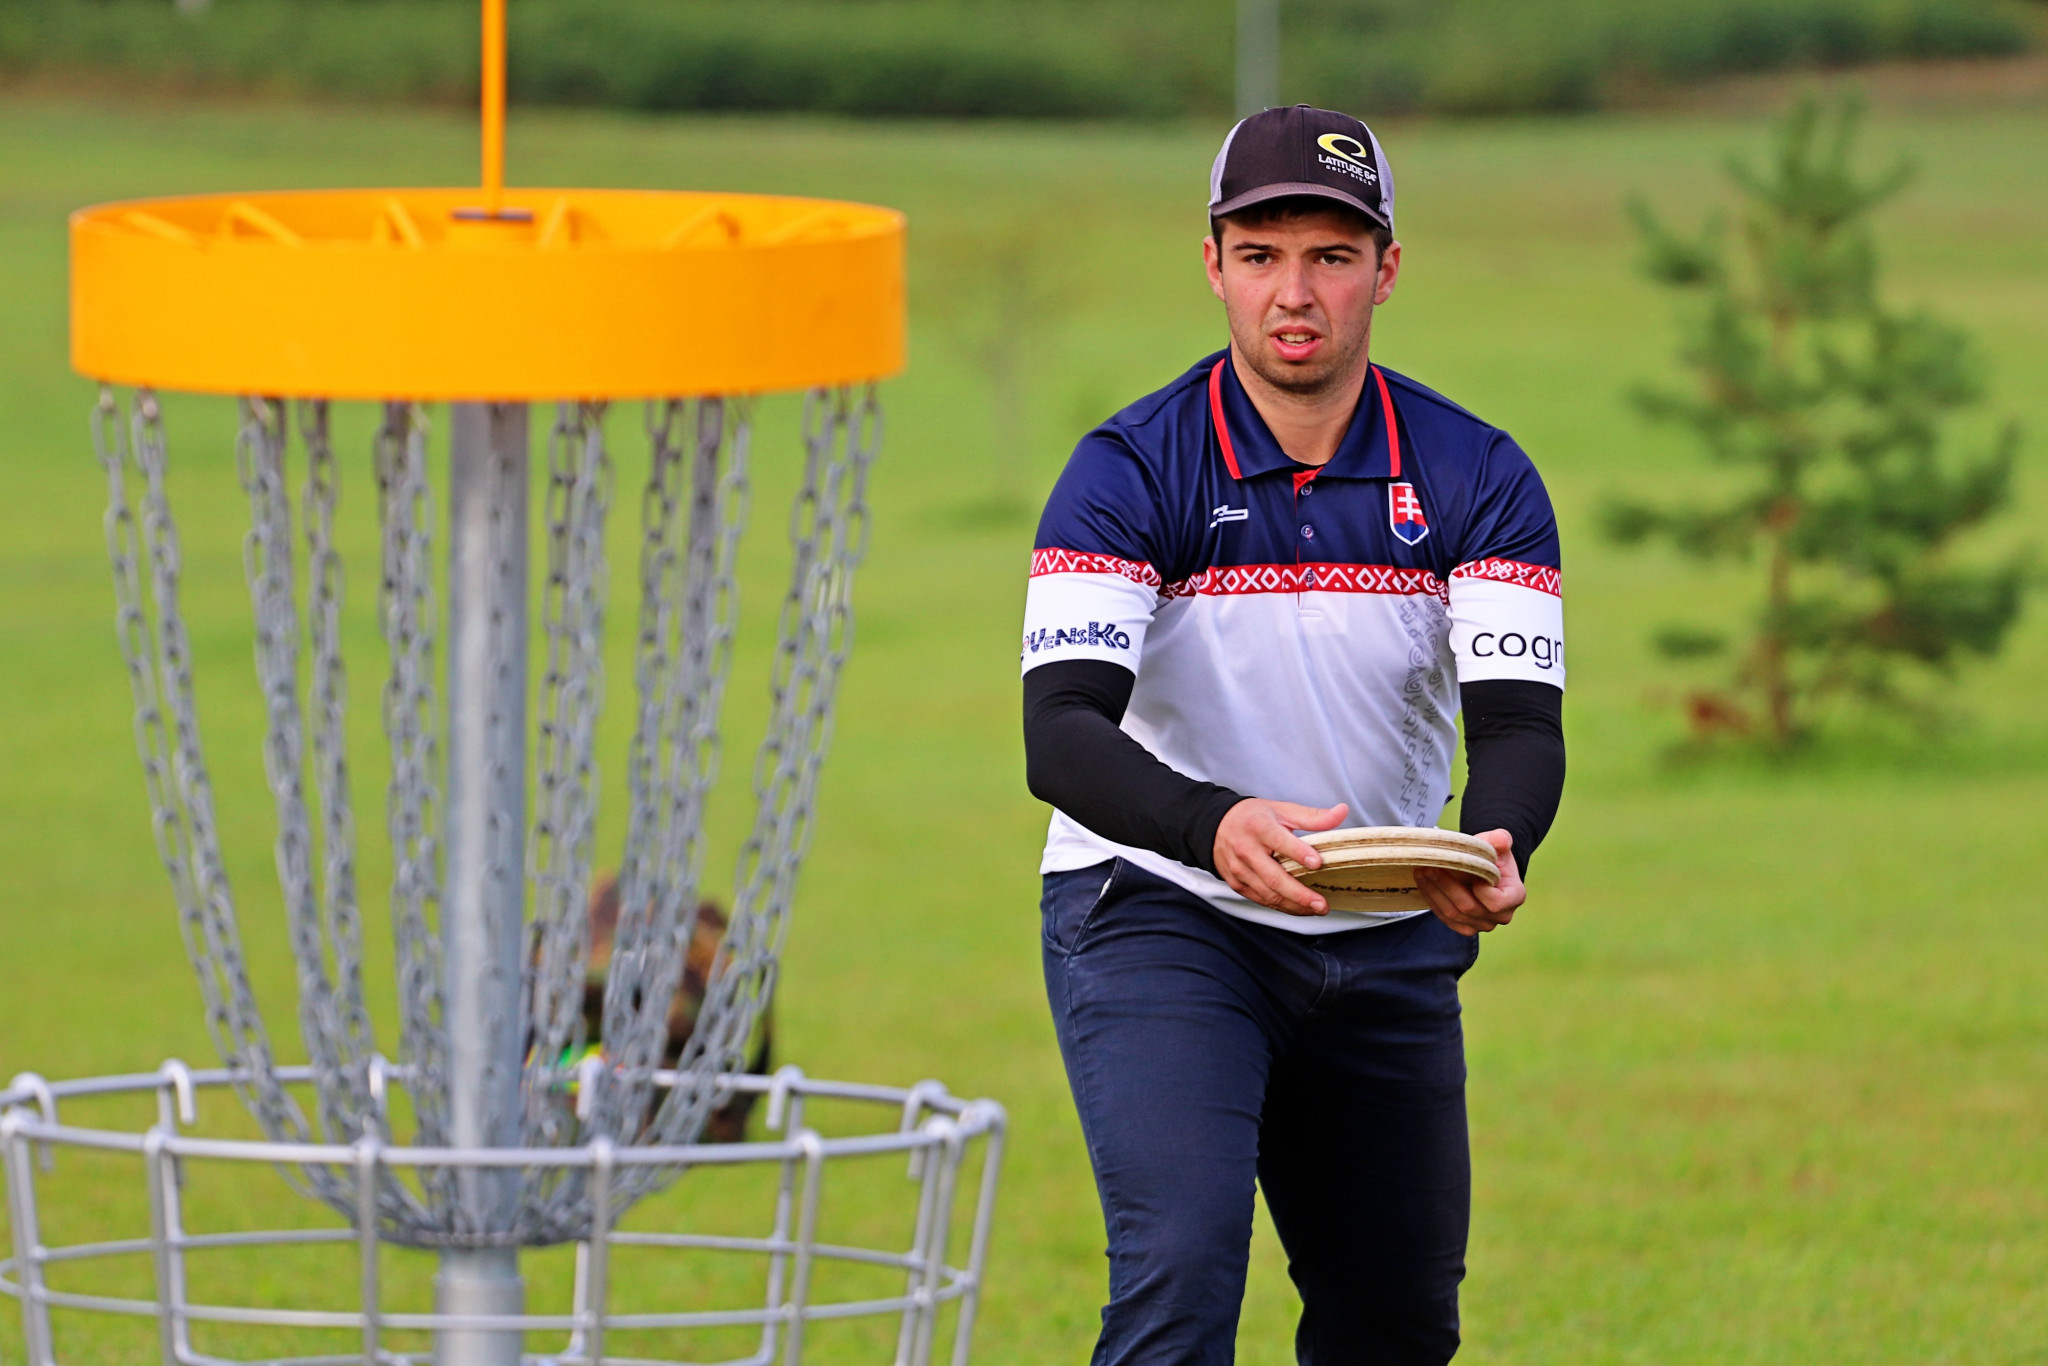 Disc golf targeting shot at Olympics after securing World Games return